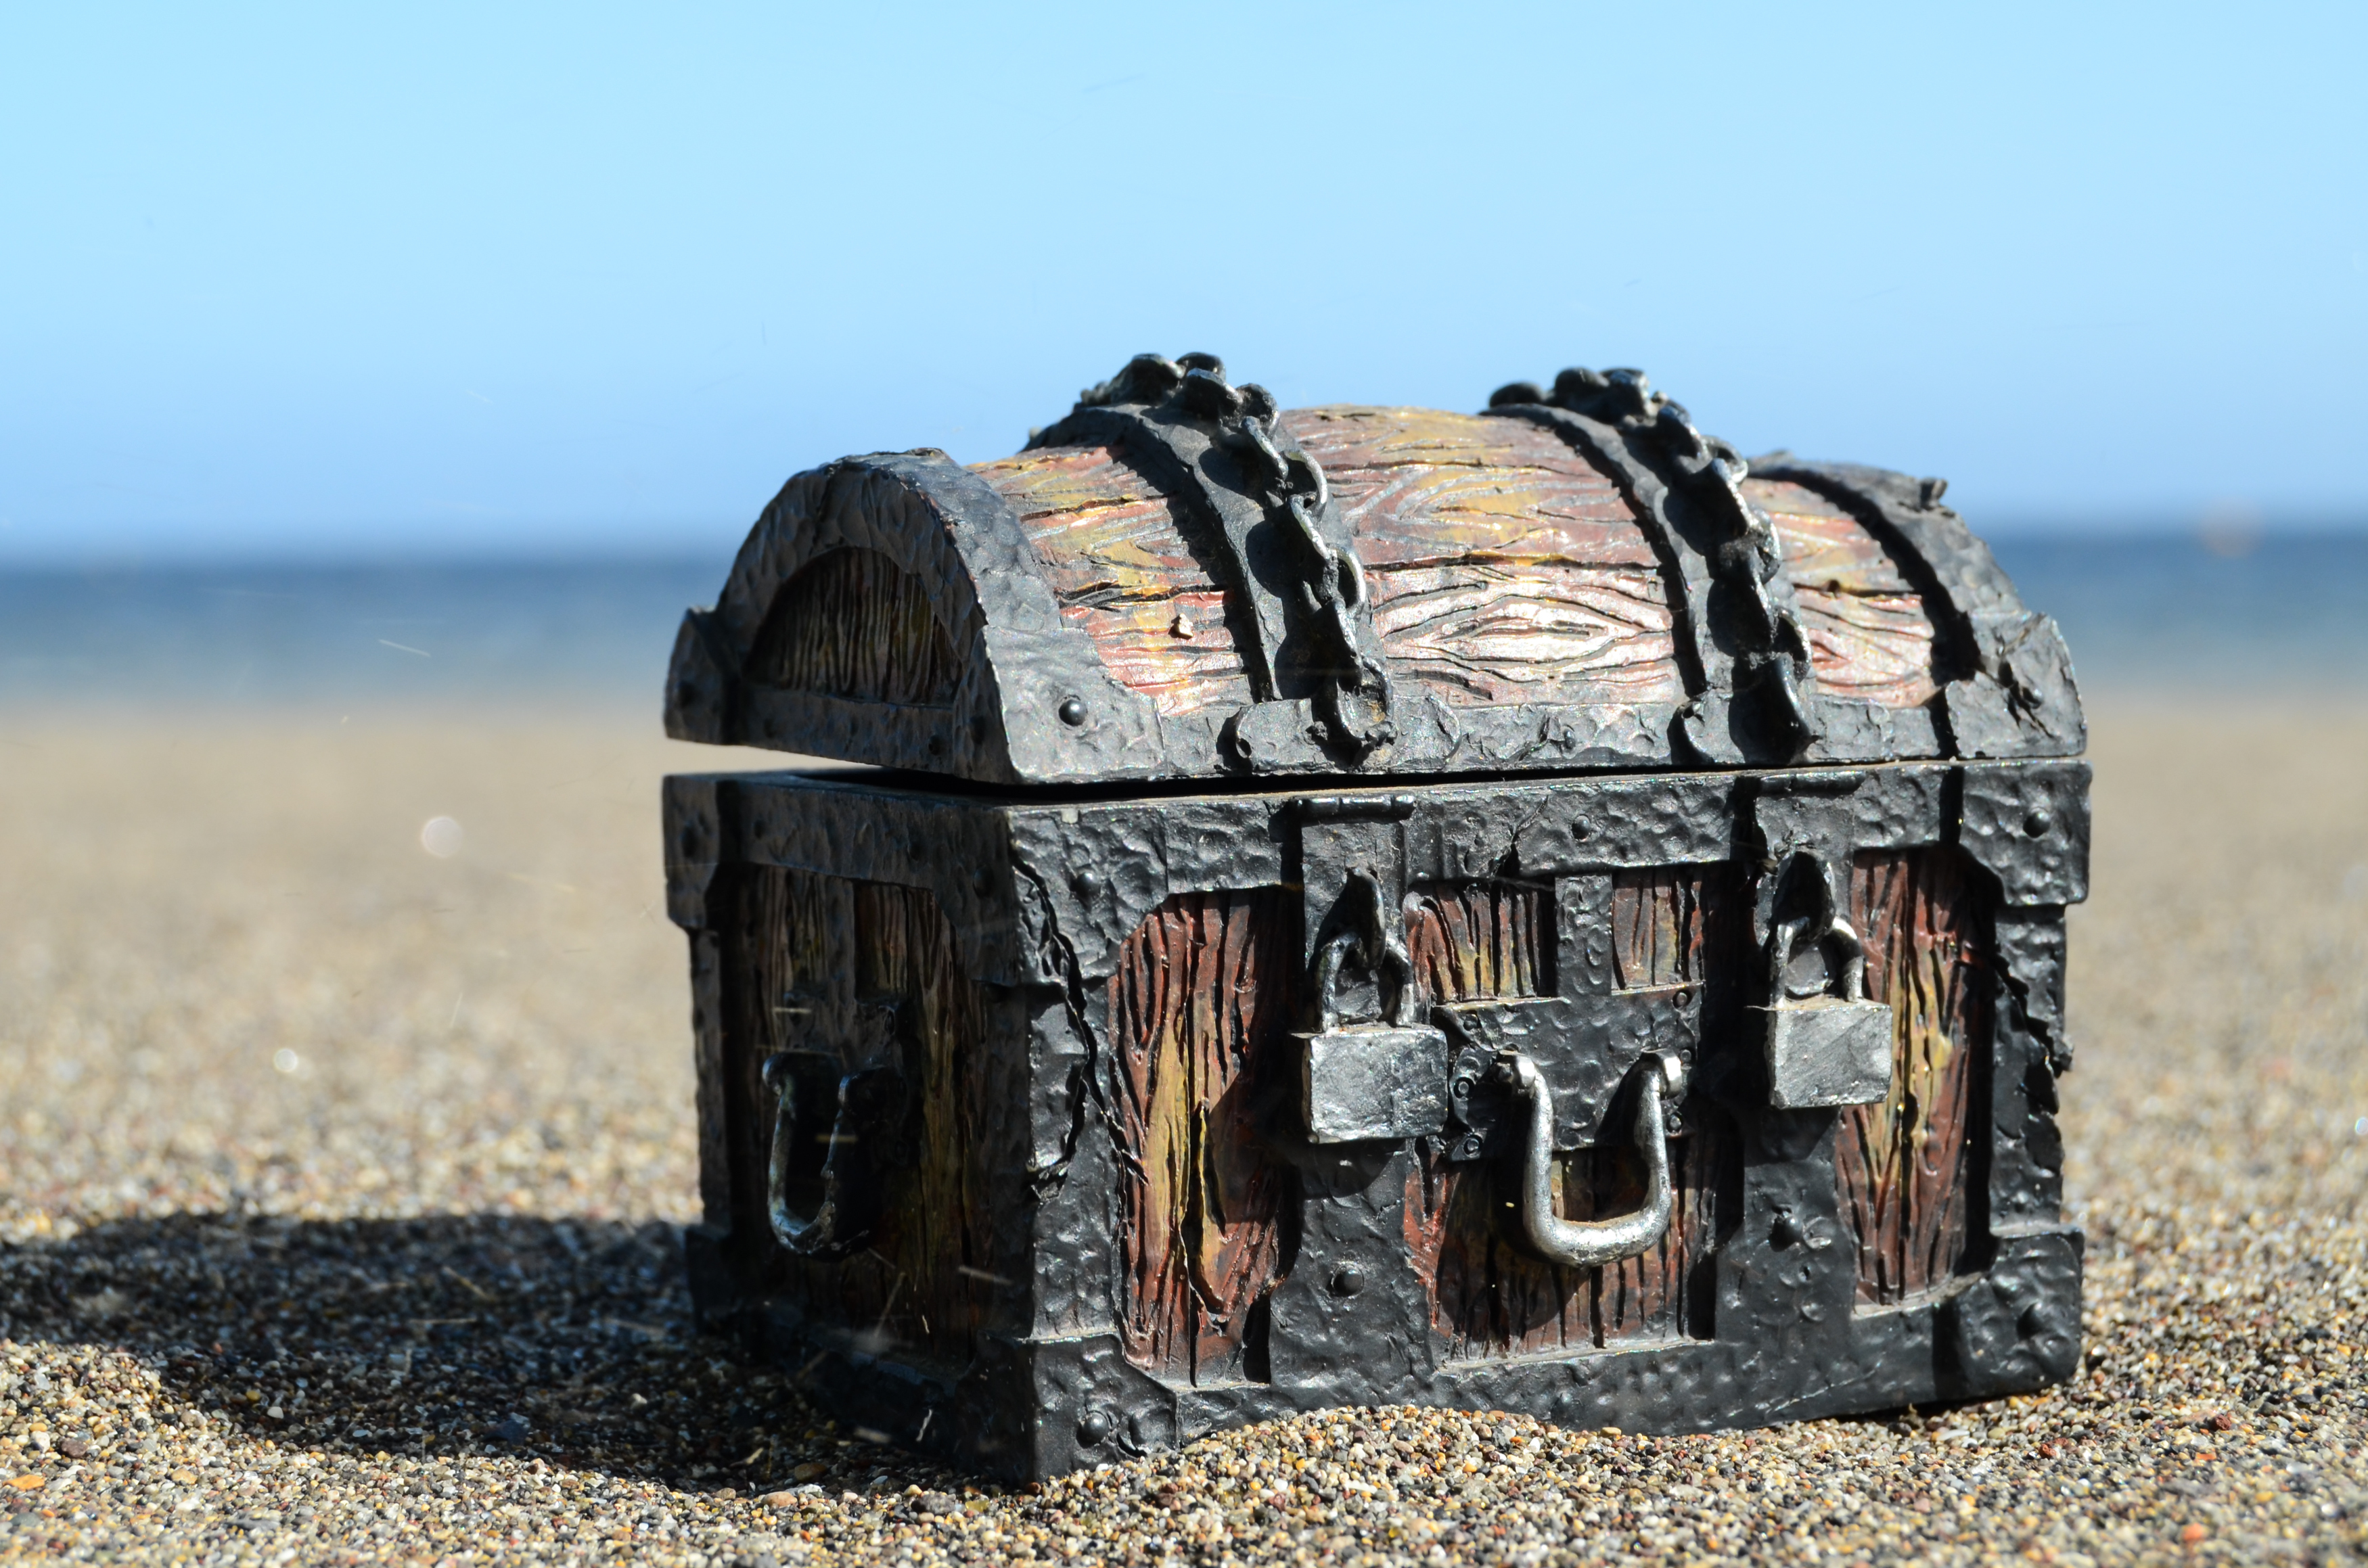 An old wooden chest on a beach